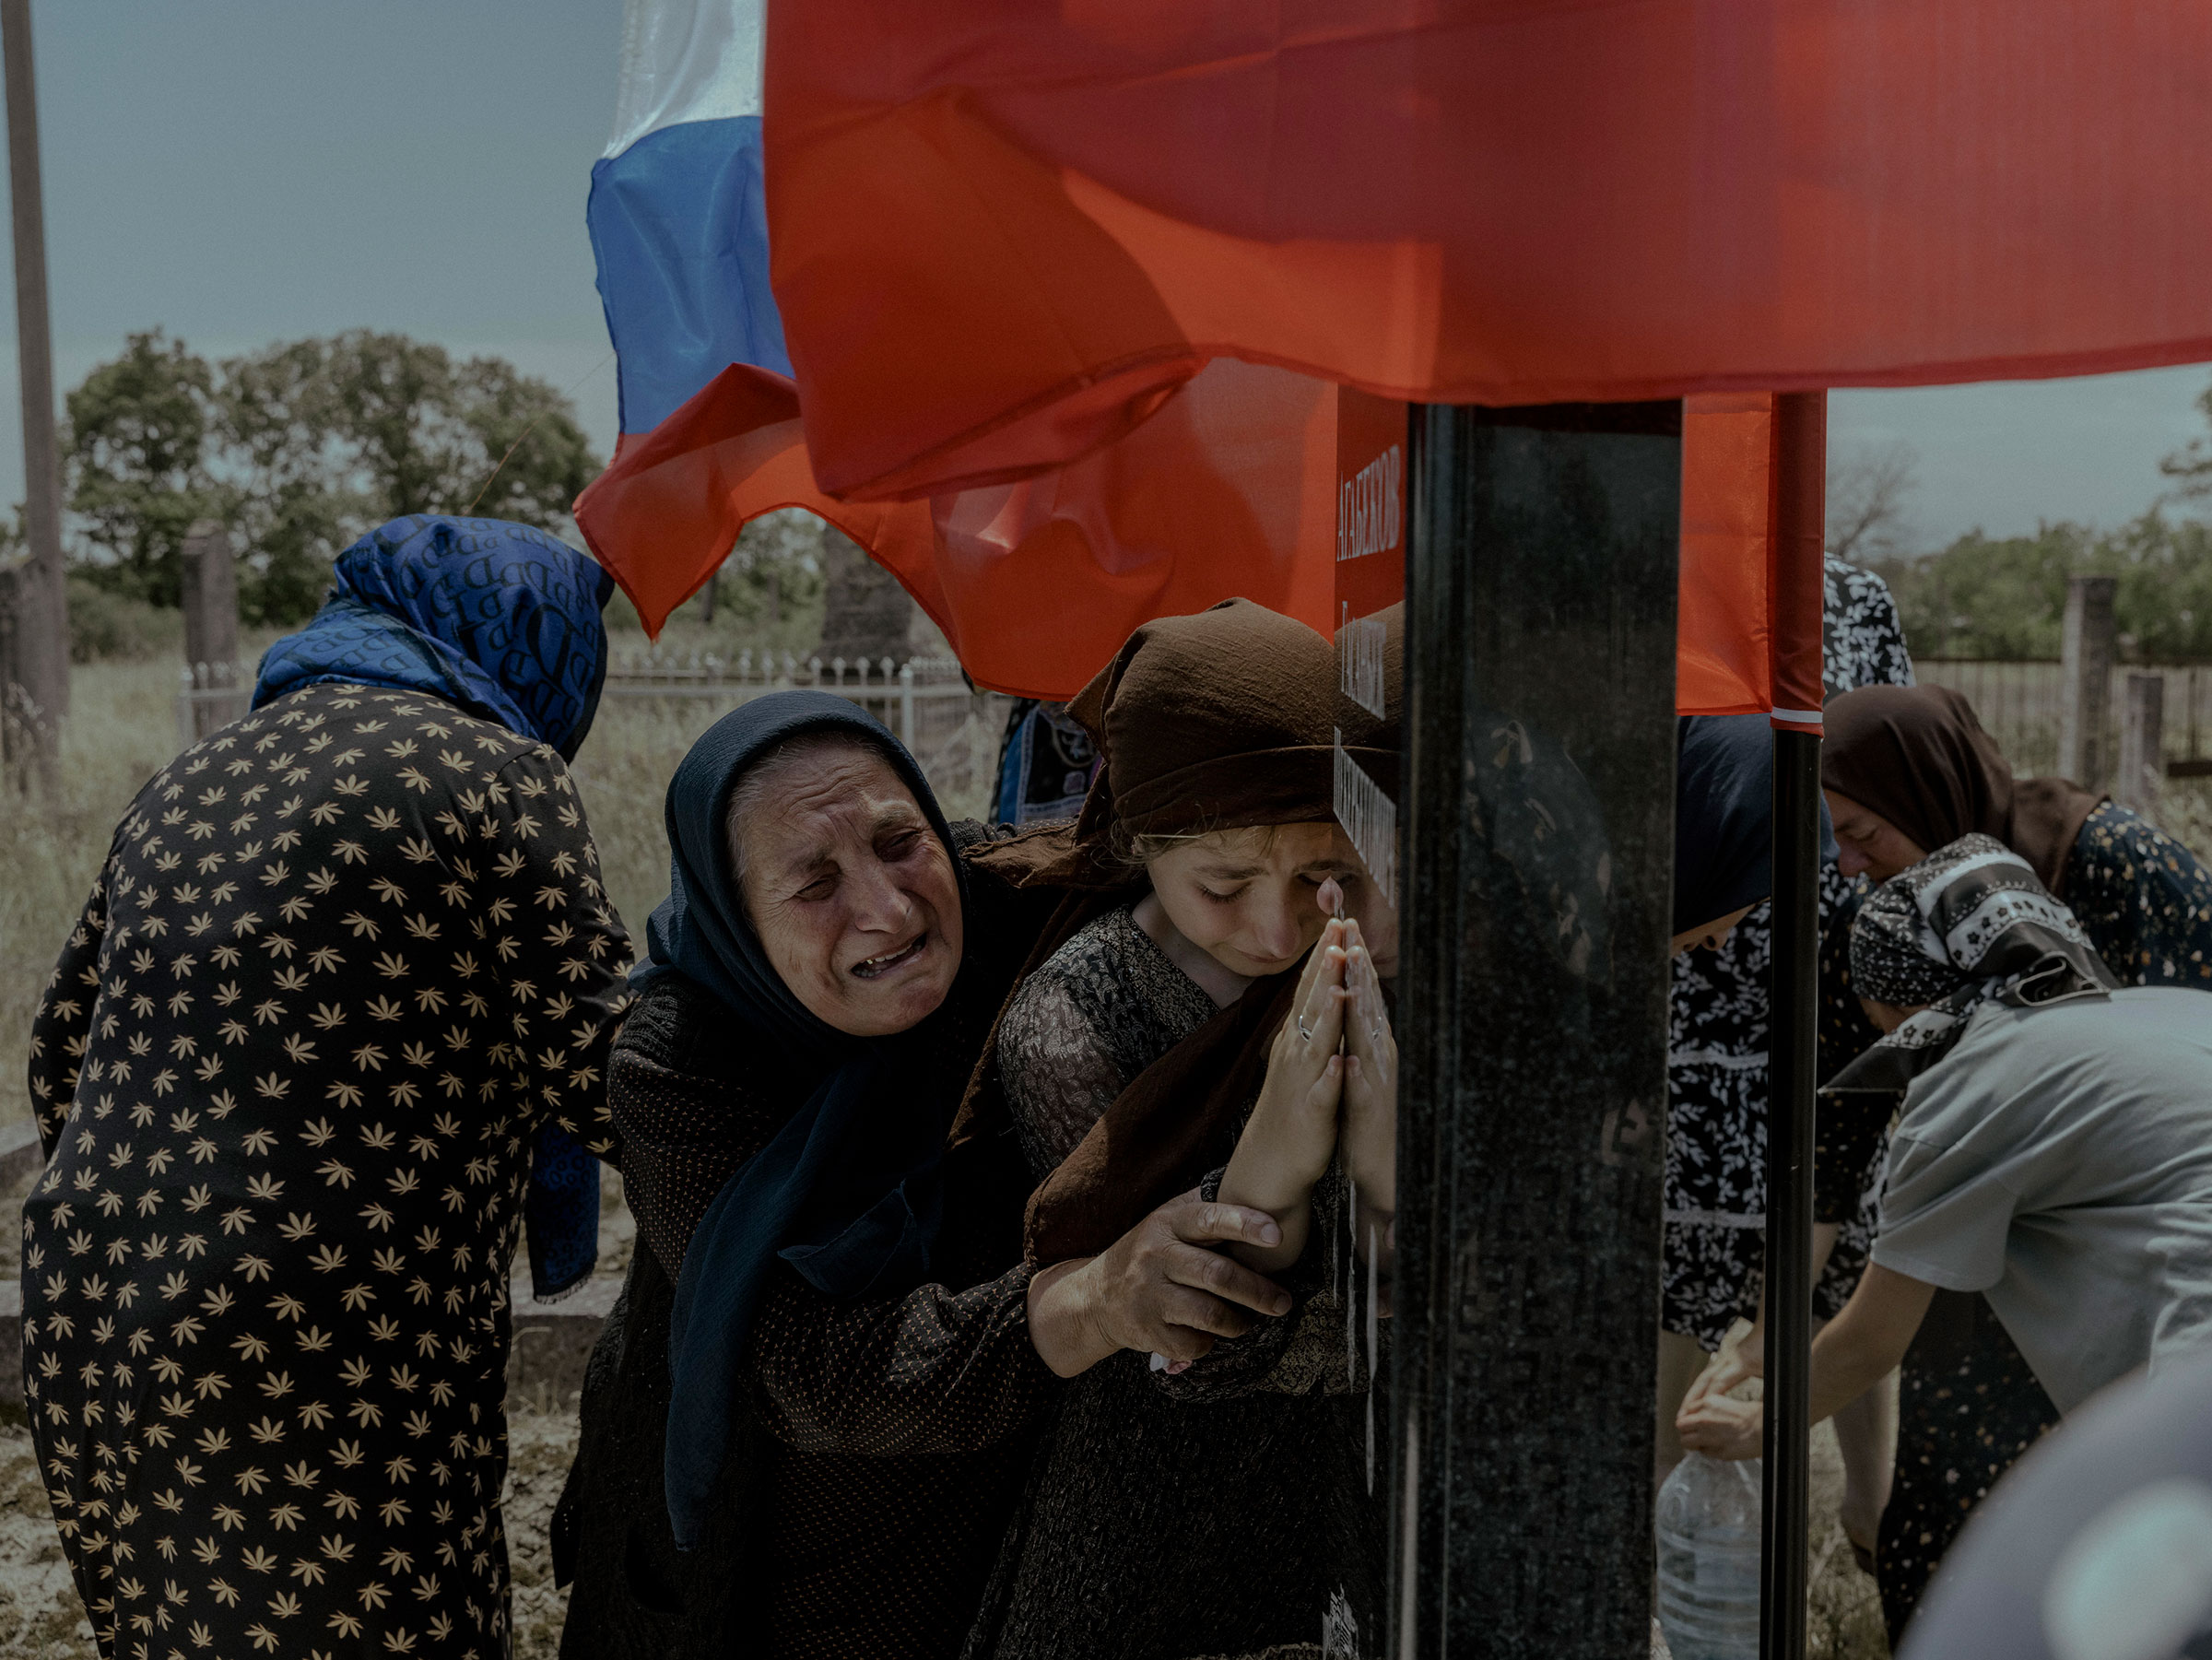 Women mourn the death of their family member and conscript soldier Gasanbek Agabekov, who was killed in Ukraine the 27th of May, in Aglobi, Dagestan, Russia, on June 16. In Dagestan, family members of the deceased meet at regular intervals to grieve. An imam said that fifteen other men from Gasanbek’s area had died in the war. The republic that has seen the most war is also one of poorest republics in the Russia. (Nanna Heitmann—Magnum Photos)